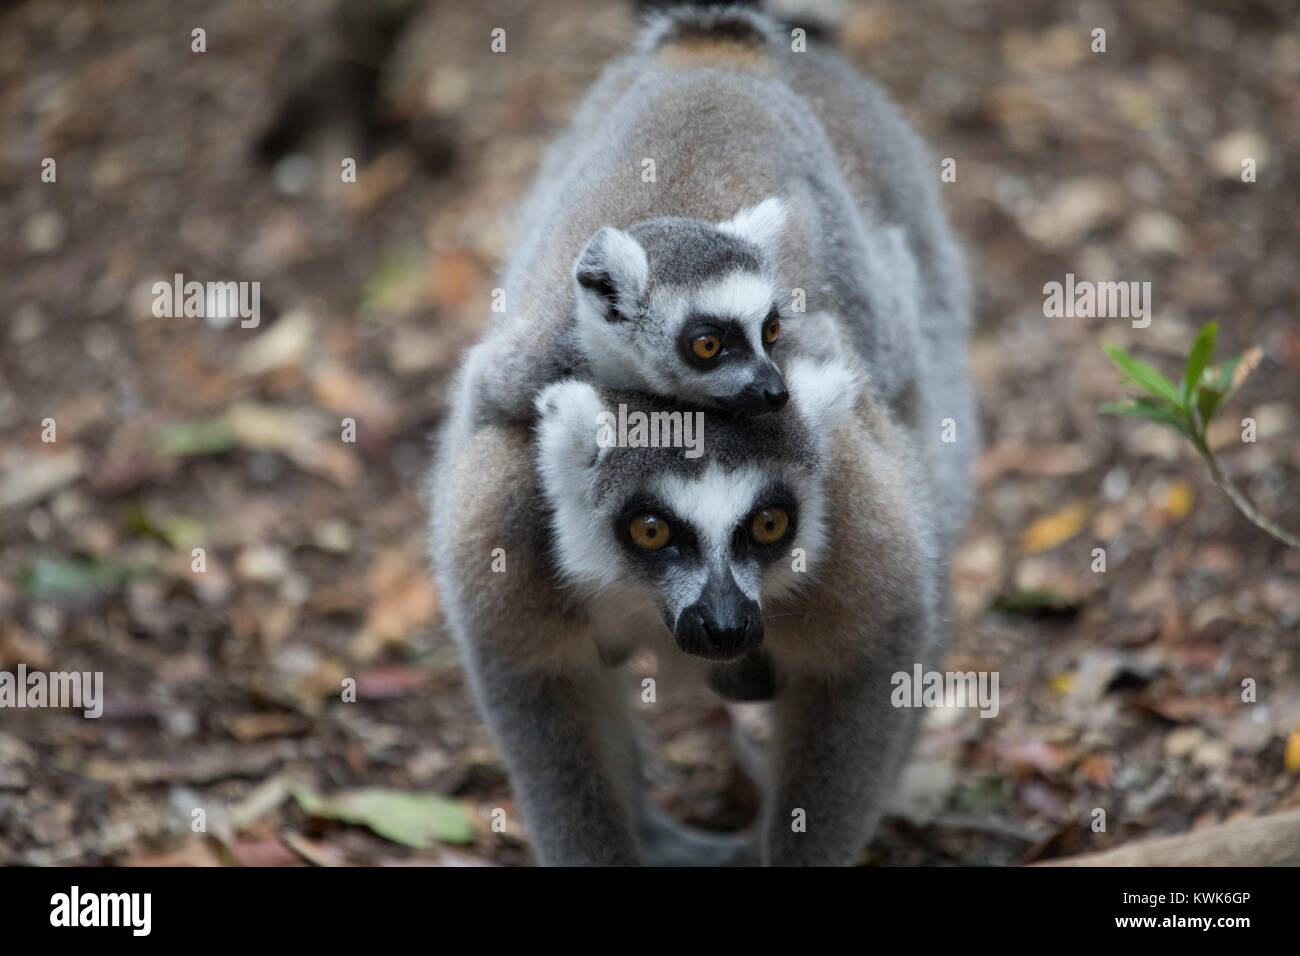 Madagascar ring-tailed lemur (Lemur catta) from the Monkeyland Sanctuary in Plettenberg Bay, South Africa. A free roaming multi-specie park, Stock Photo